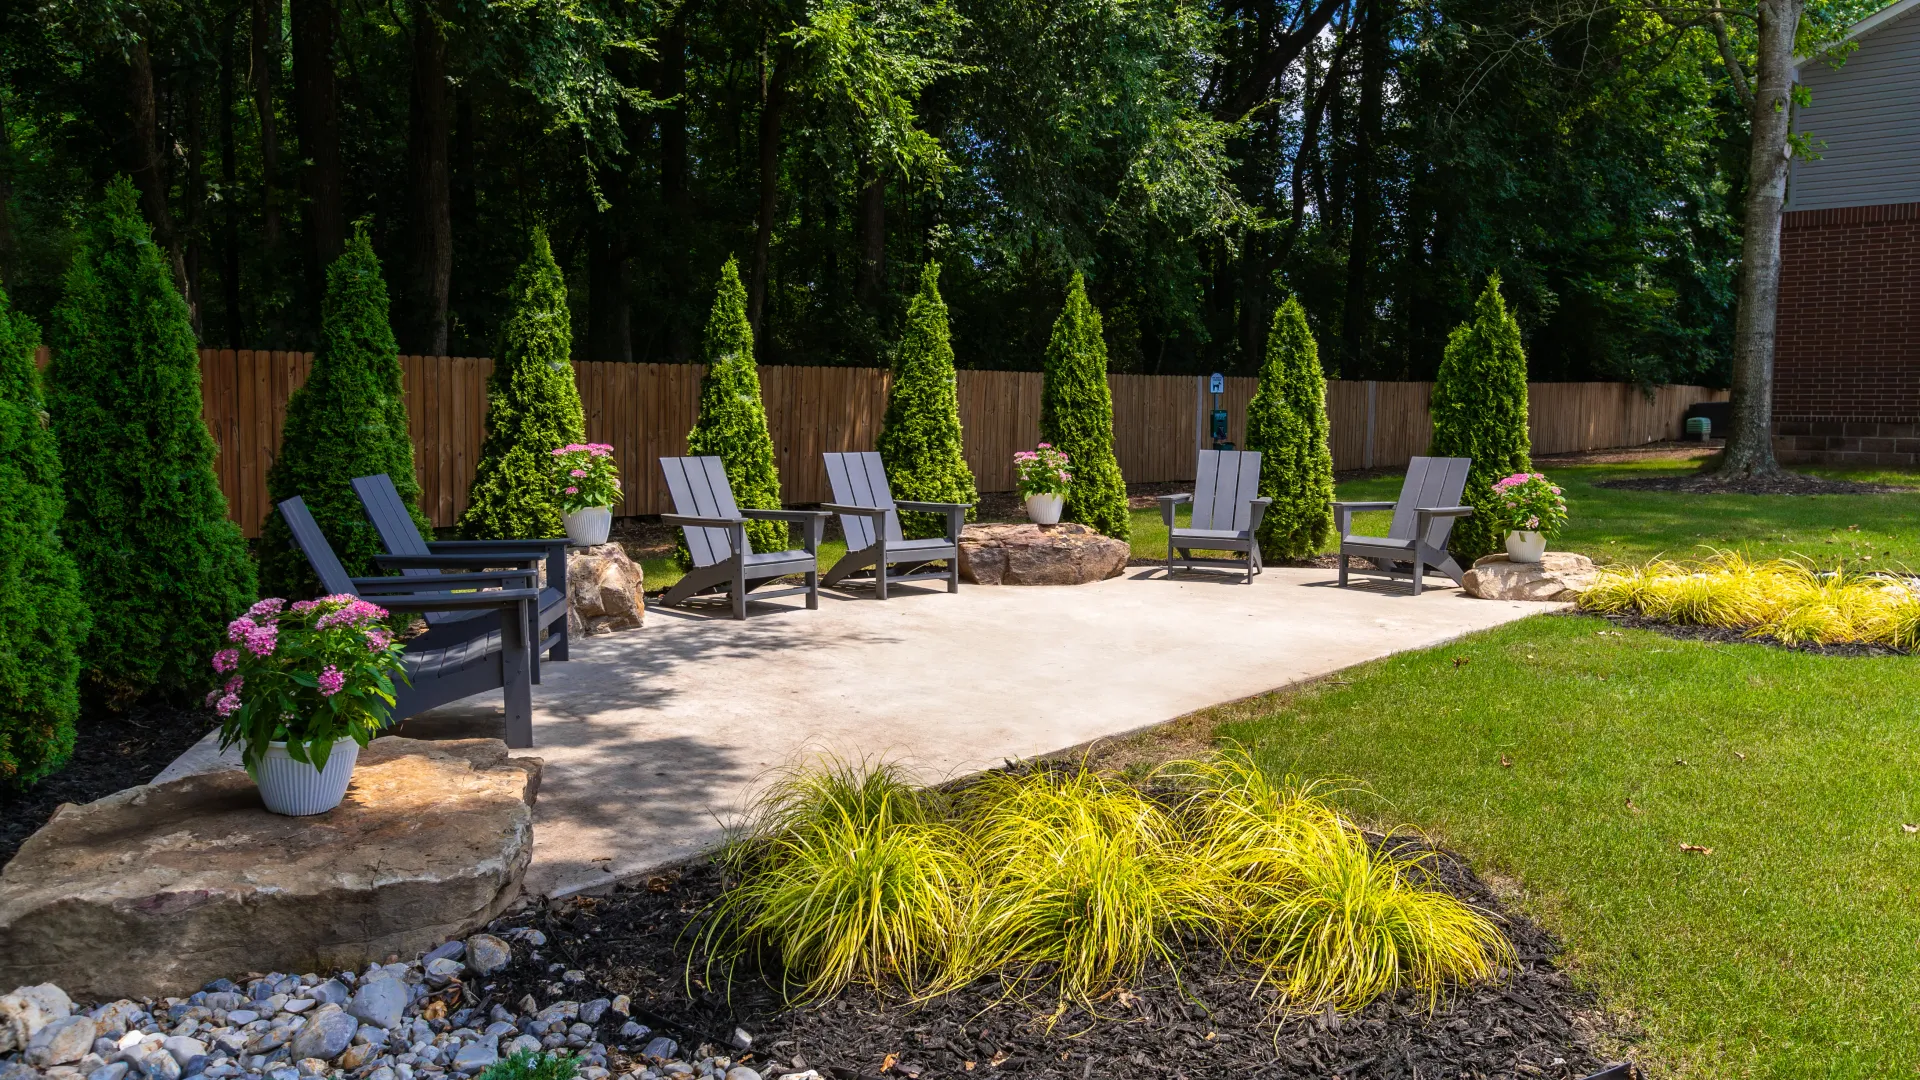 An outdoor seating area with Adirondack chairs surrounded by lush greenery and potted plants.